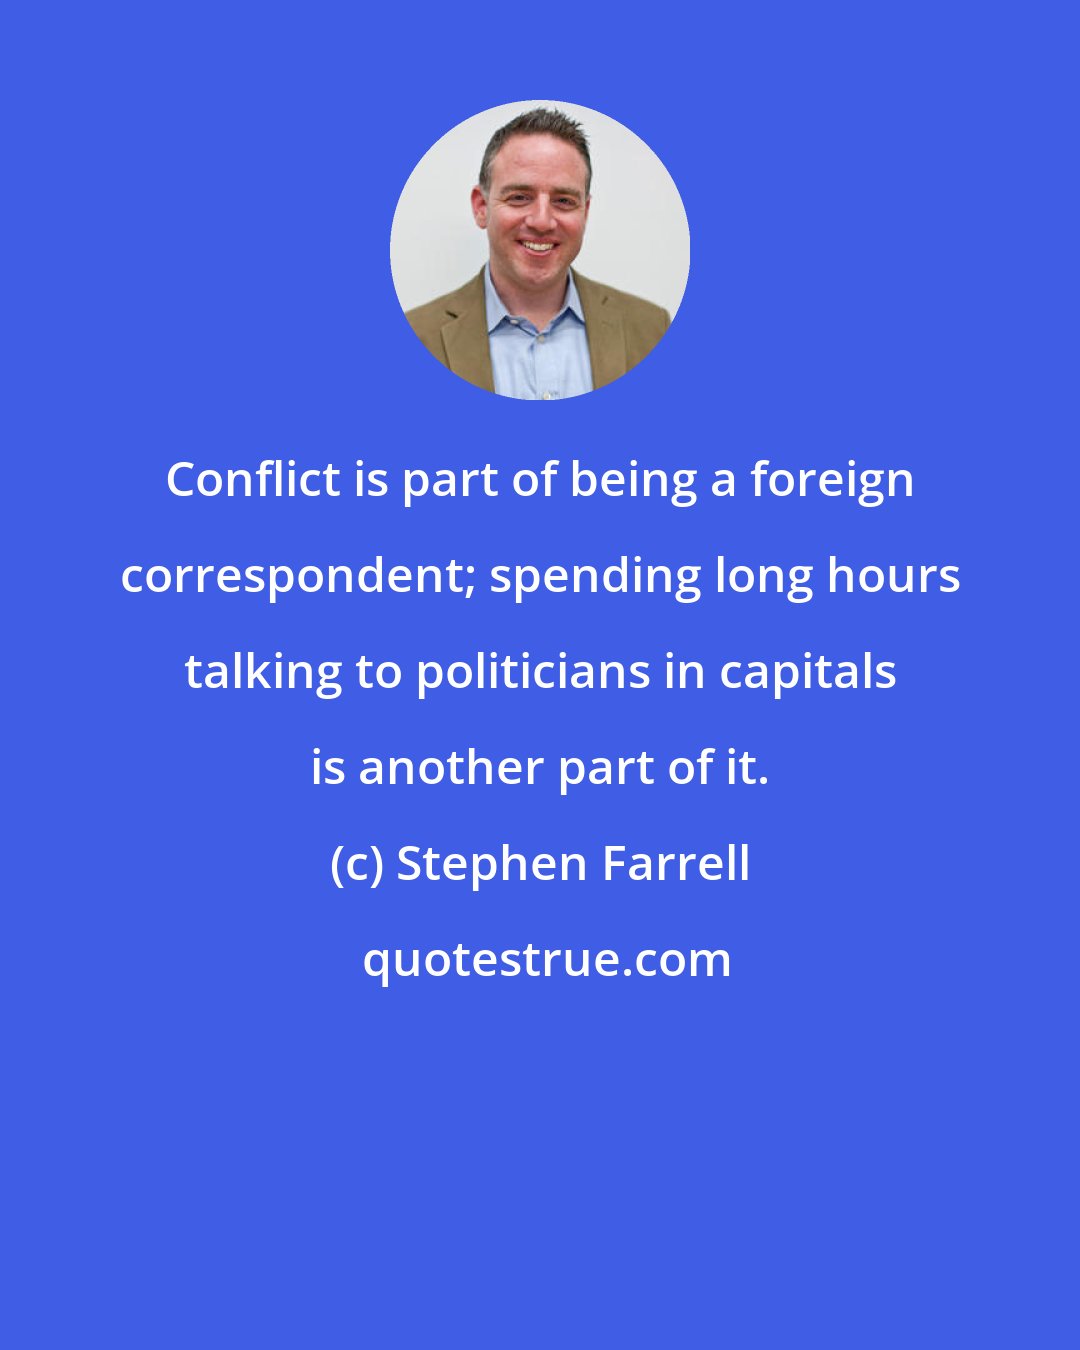 Stephen Farrell: Conflict is part of being a foreign correspondent; spending long hours talking to politicians in capitals is another part of it.